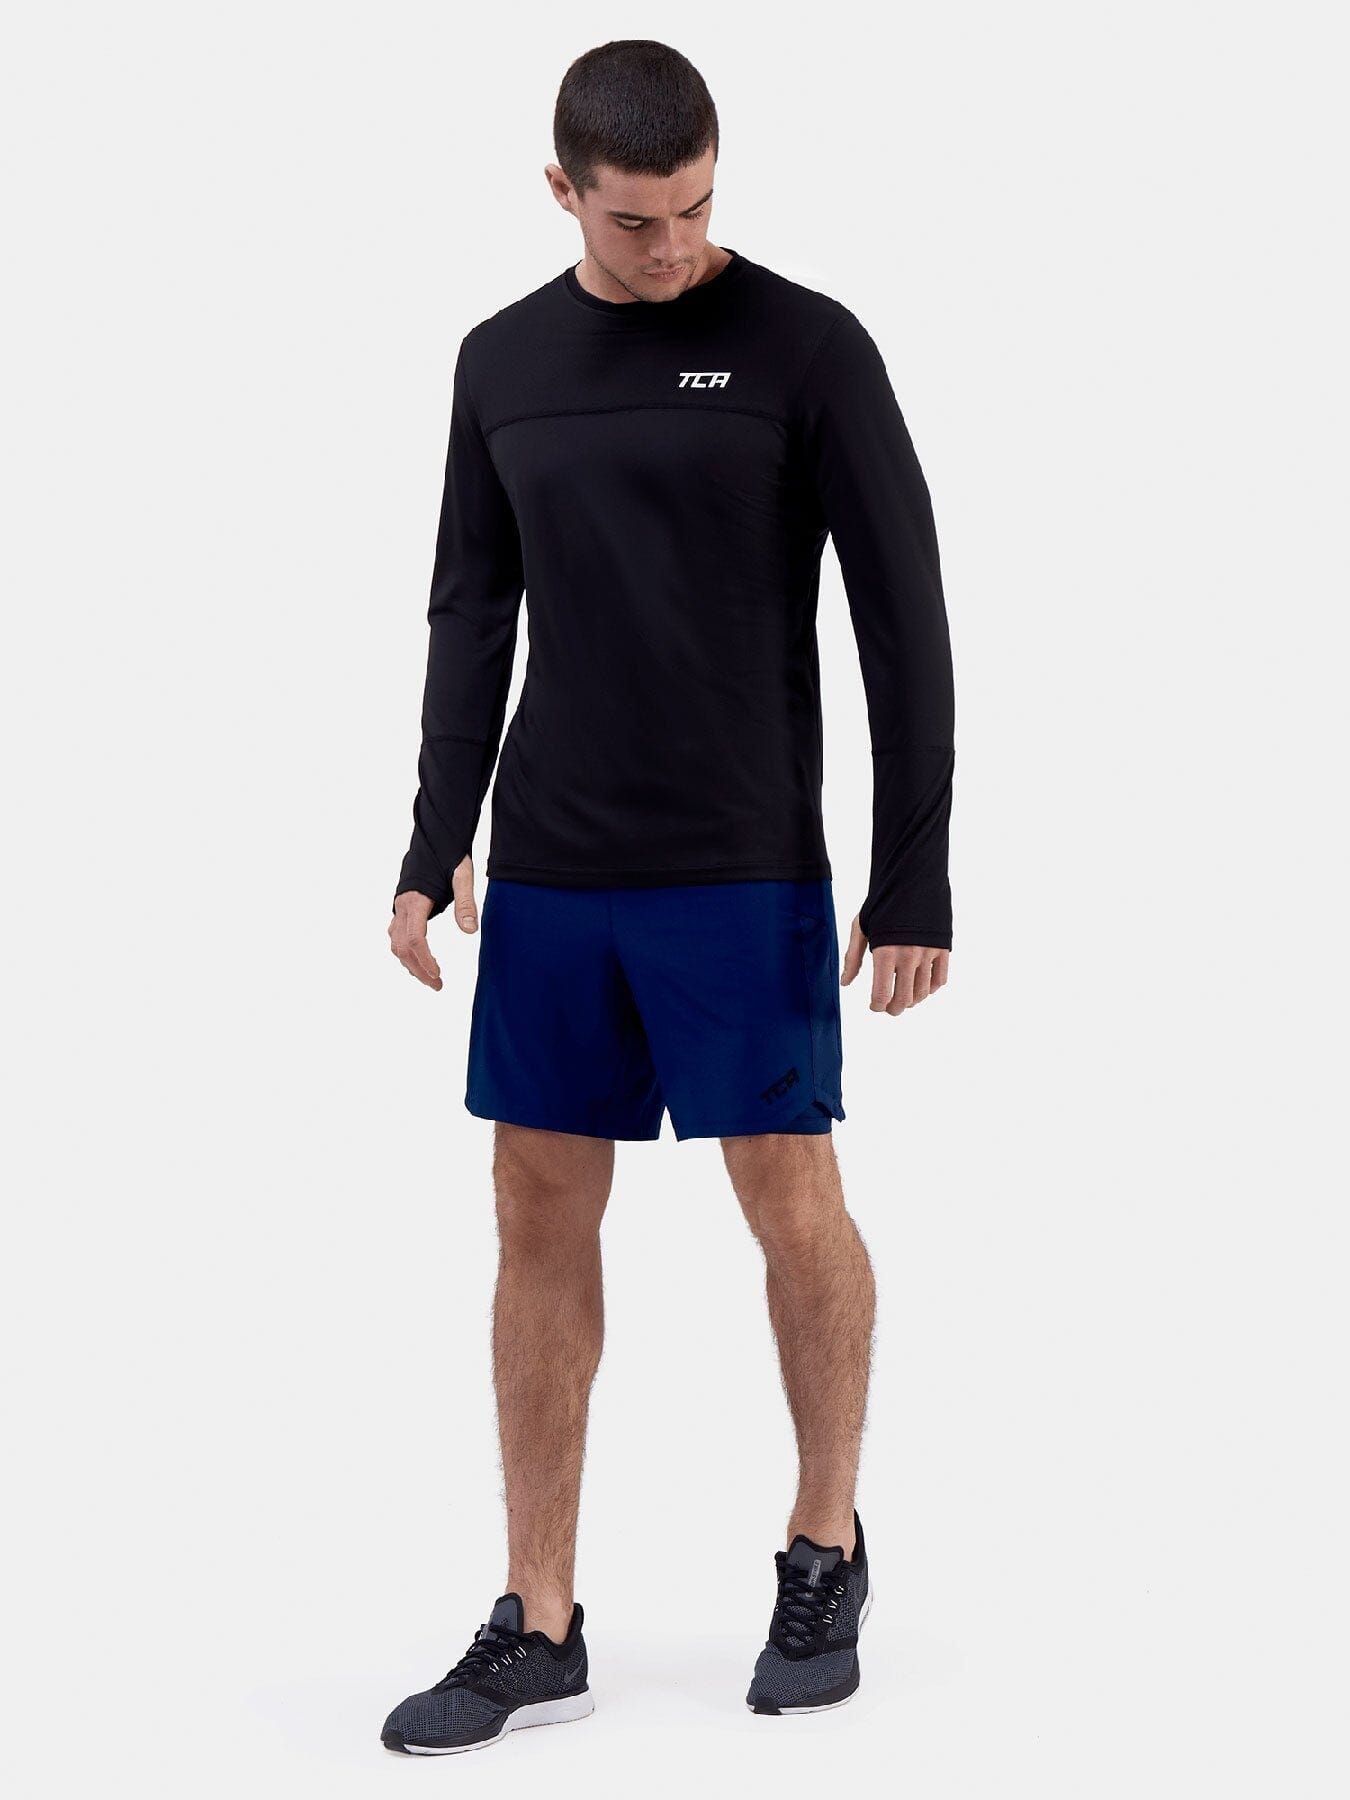 Stamina Long Sleeve Crew Neck Running Top For Men With Thumbholes